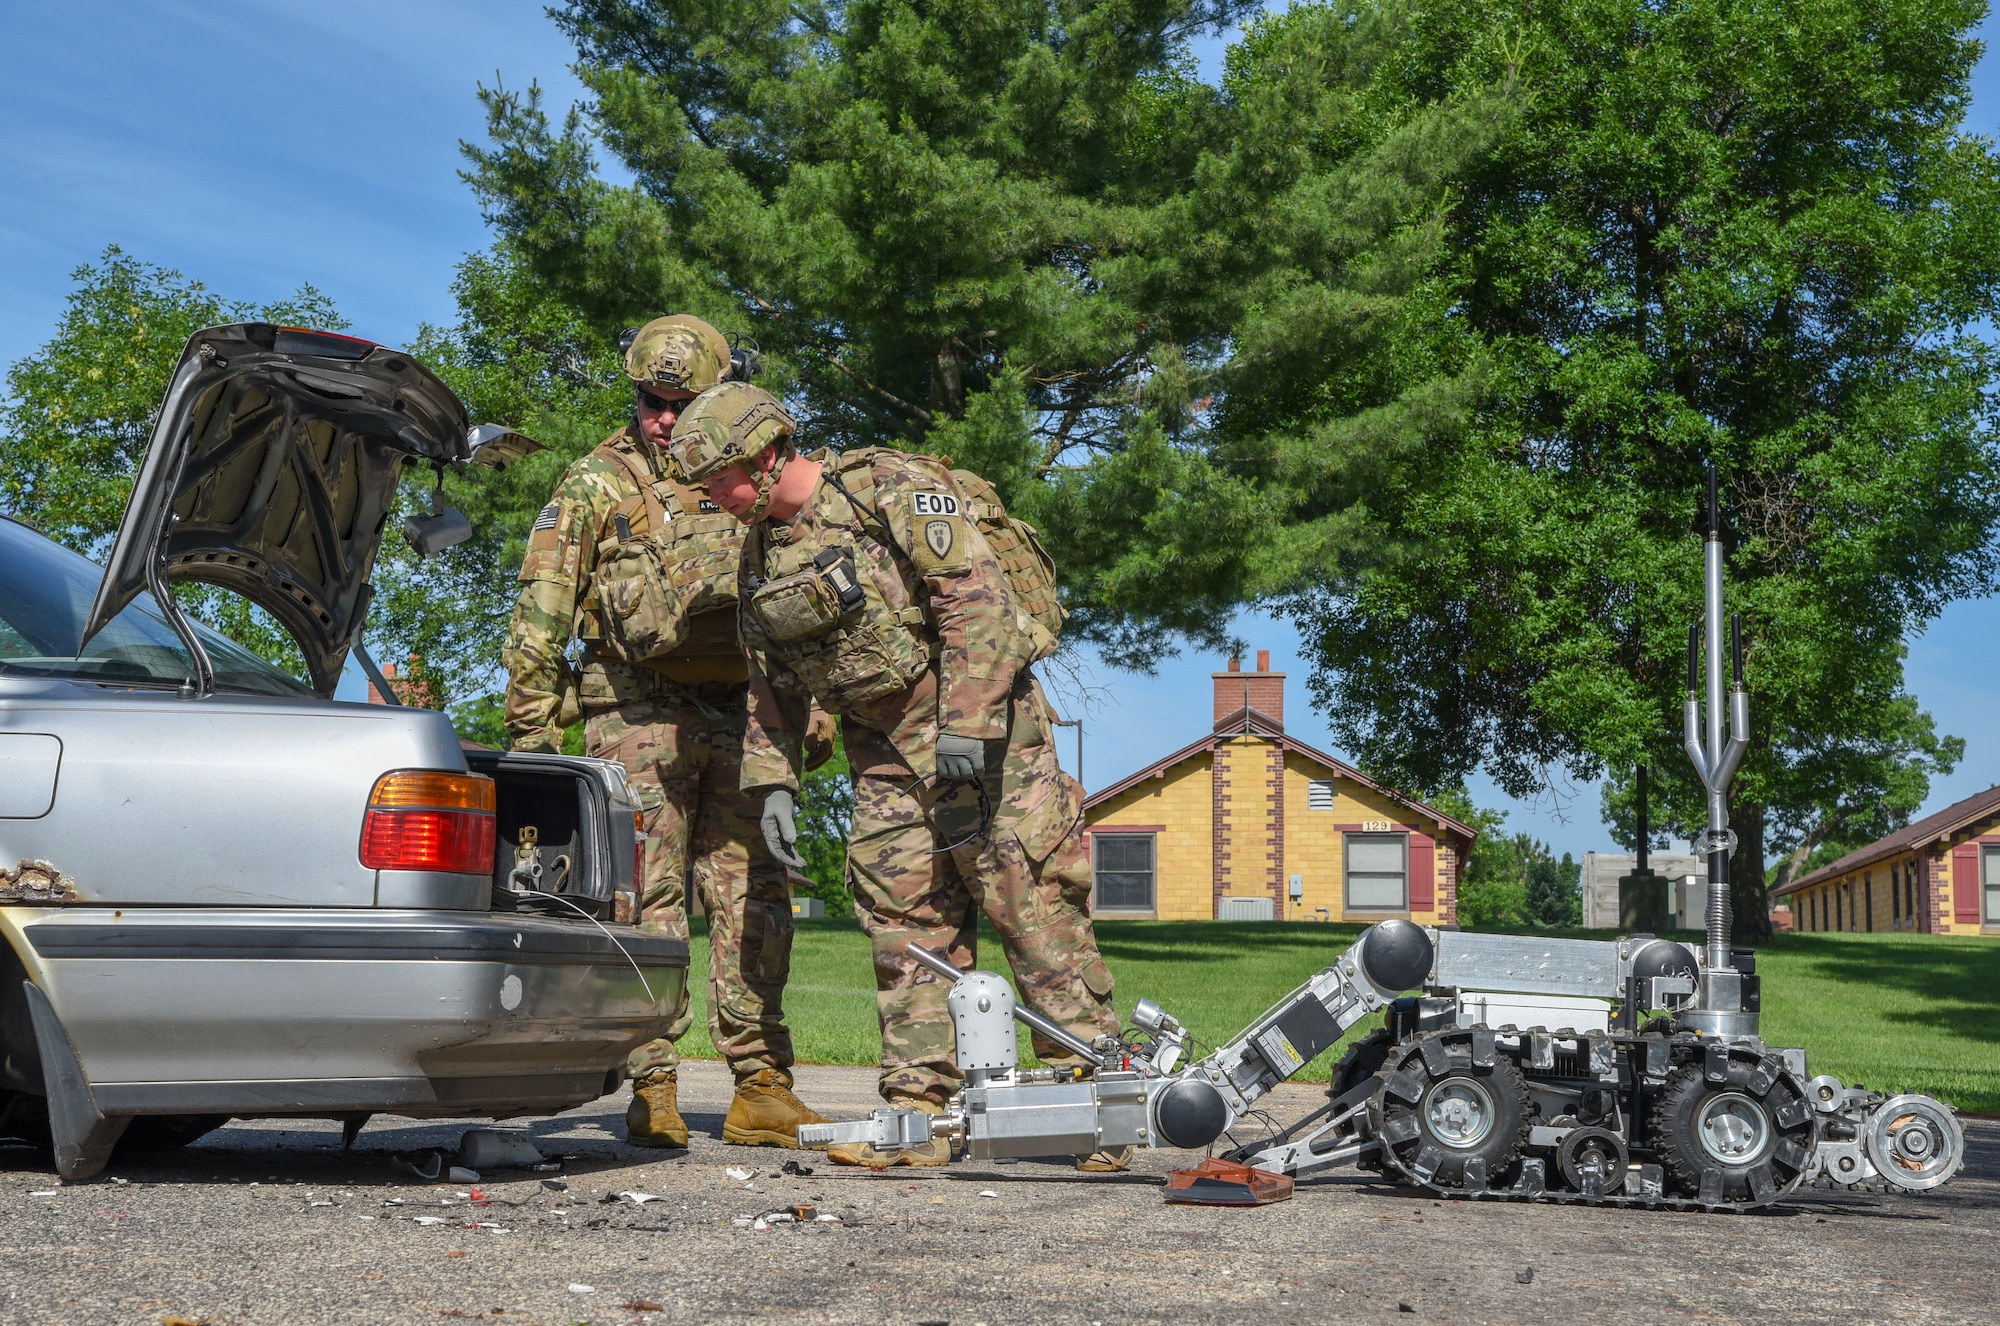 Master Sgt. Jason Ganner, the Explosive Ordnance Disposal resources NCO, for the 142nd Fighter Wing, Portland Air National Guard Base, Oregon, and Staff Sgt. Tyler Porter, an EOD technician with the 155th Air Refueling Wing, confirm the disruption of an explosive device and collect evidence June 23, 2018, at Volk Field Air National Guard Base, Wisconsin. Ganner and Porter are at Volk as part of the annual Audacious Warrior Exercise. (U.S. Air National Guard photo by Airman Cameron Lewis)